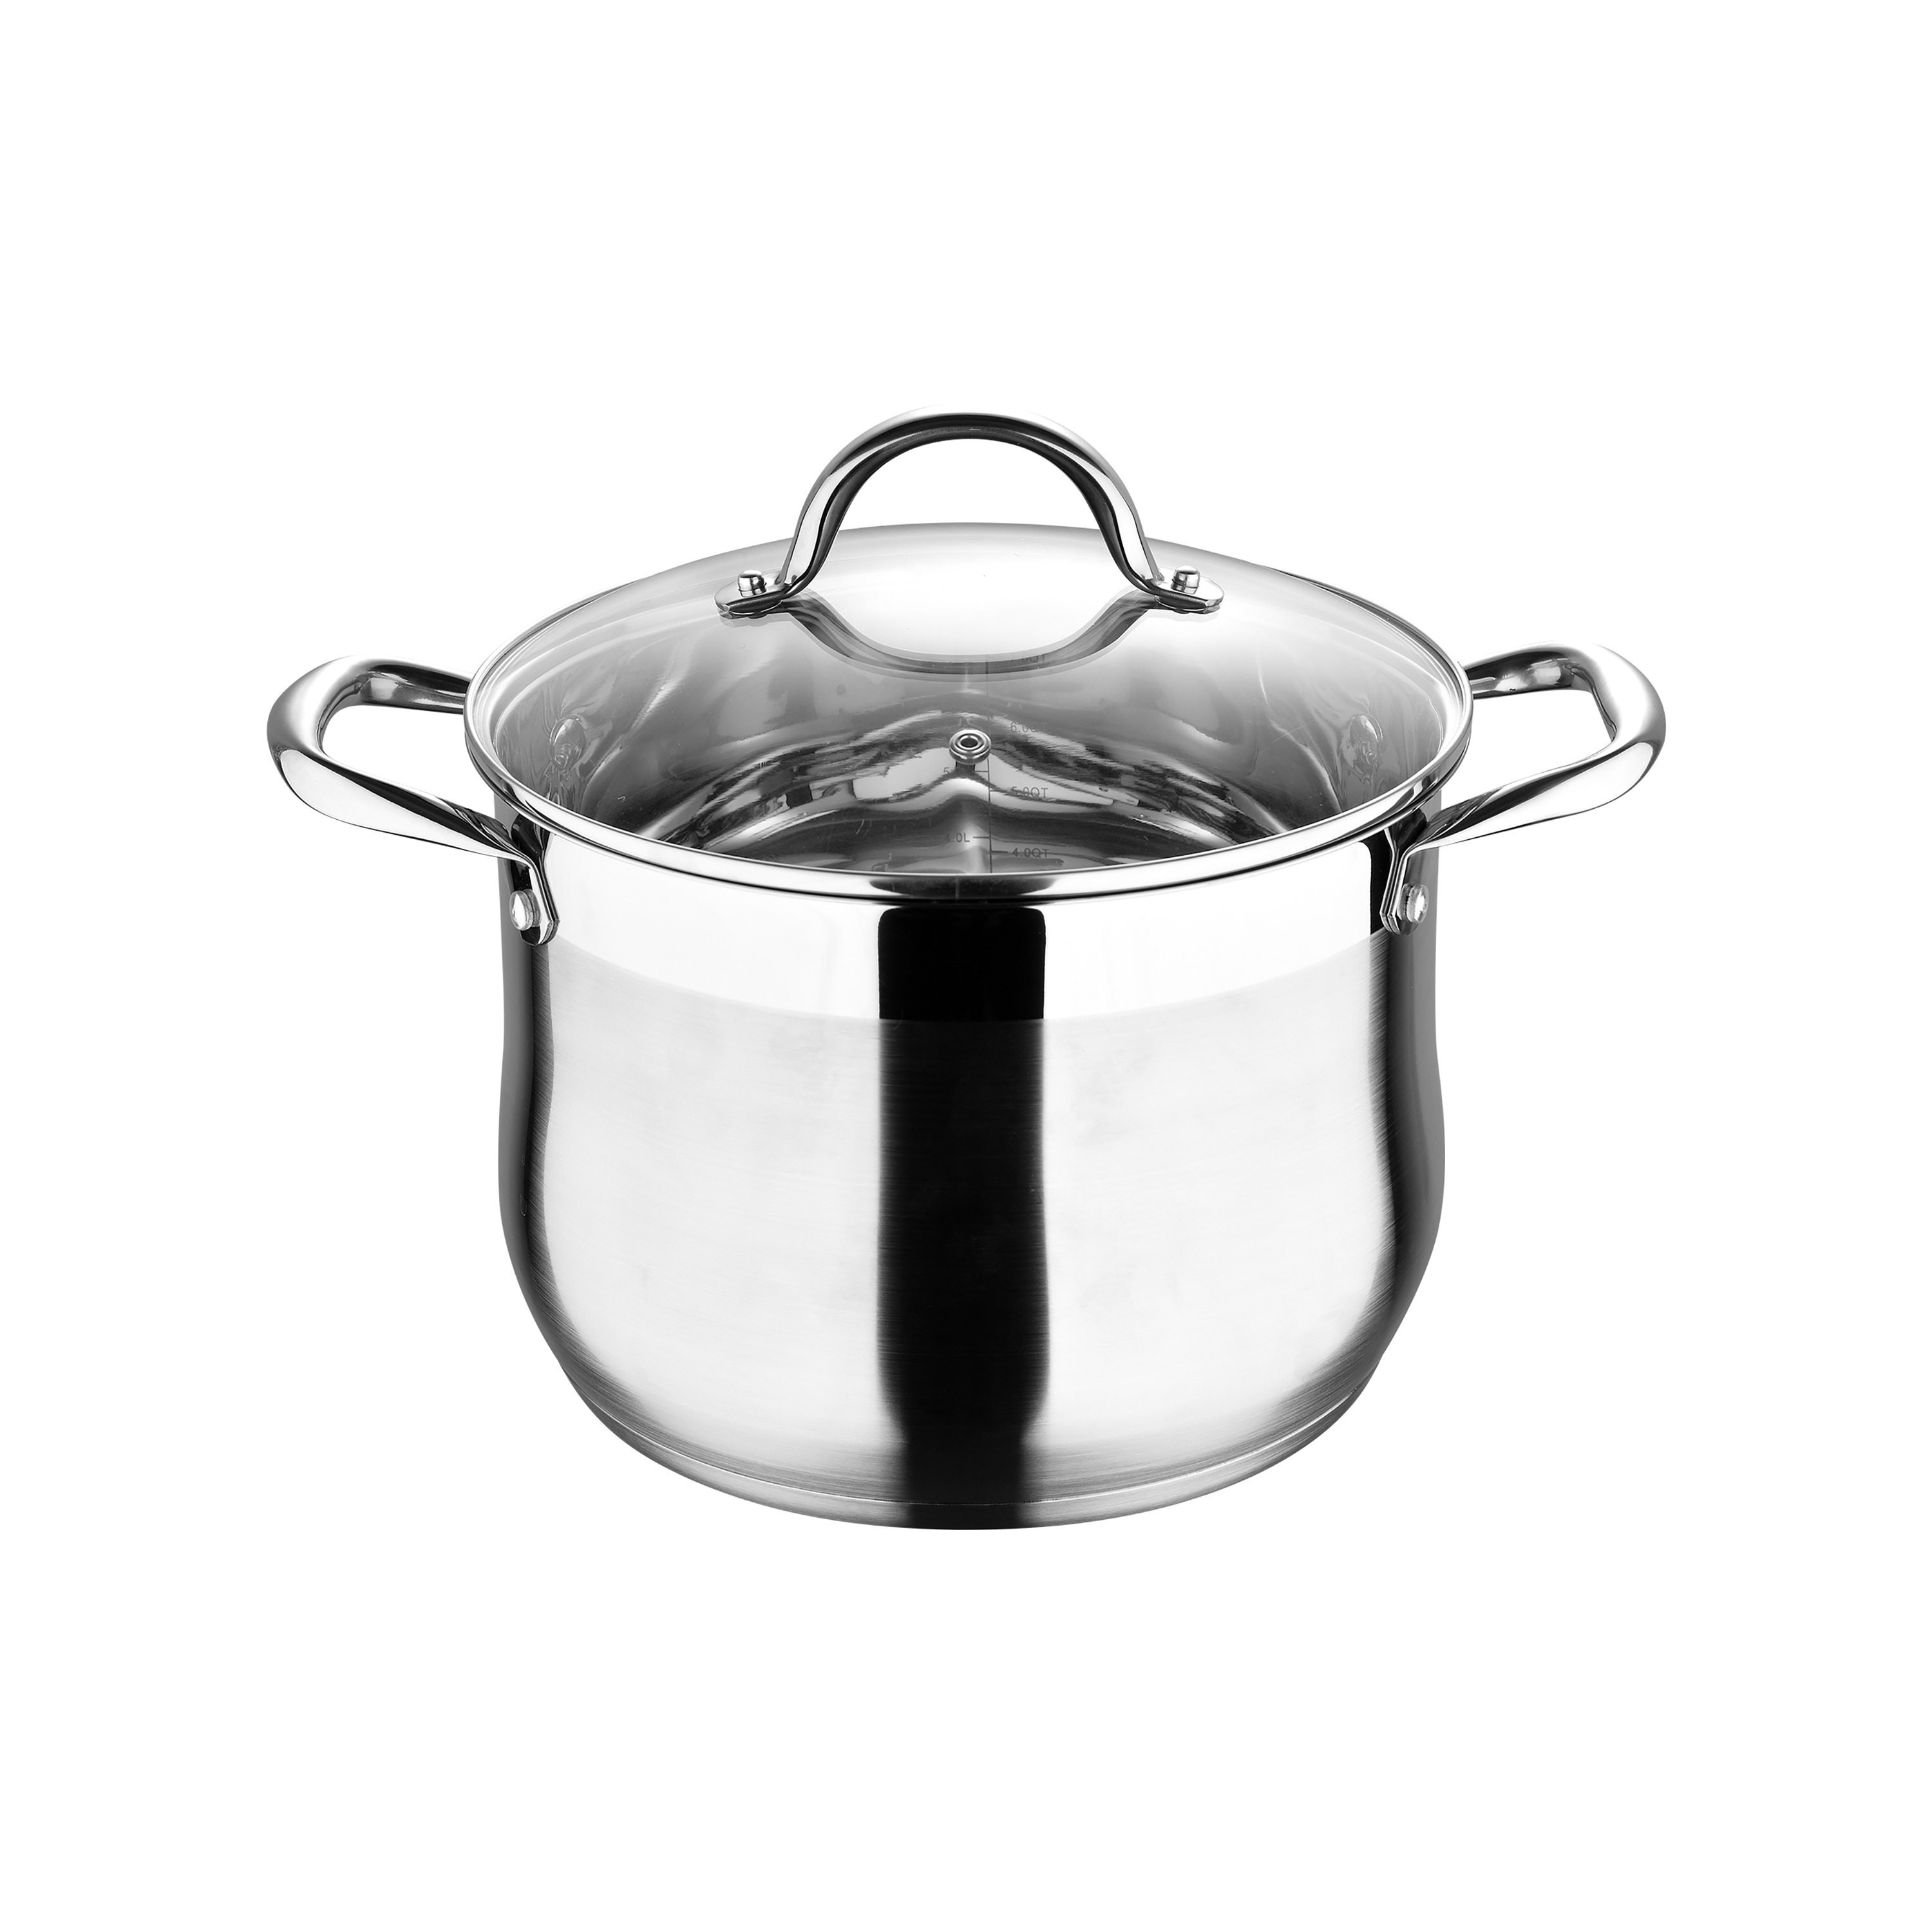 BERGNER 1.5 qt. Stainless Steel Nonstick Sauce Pot with Tempered